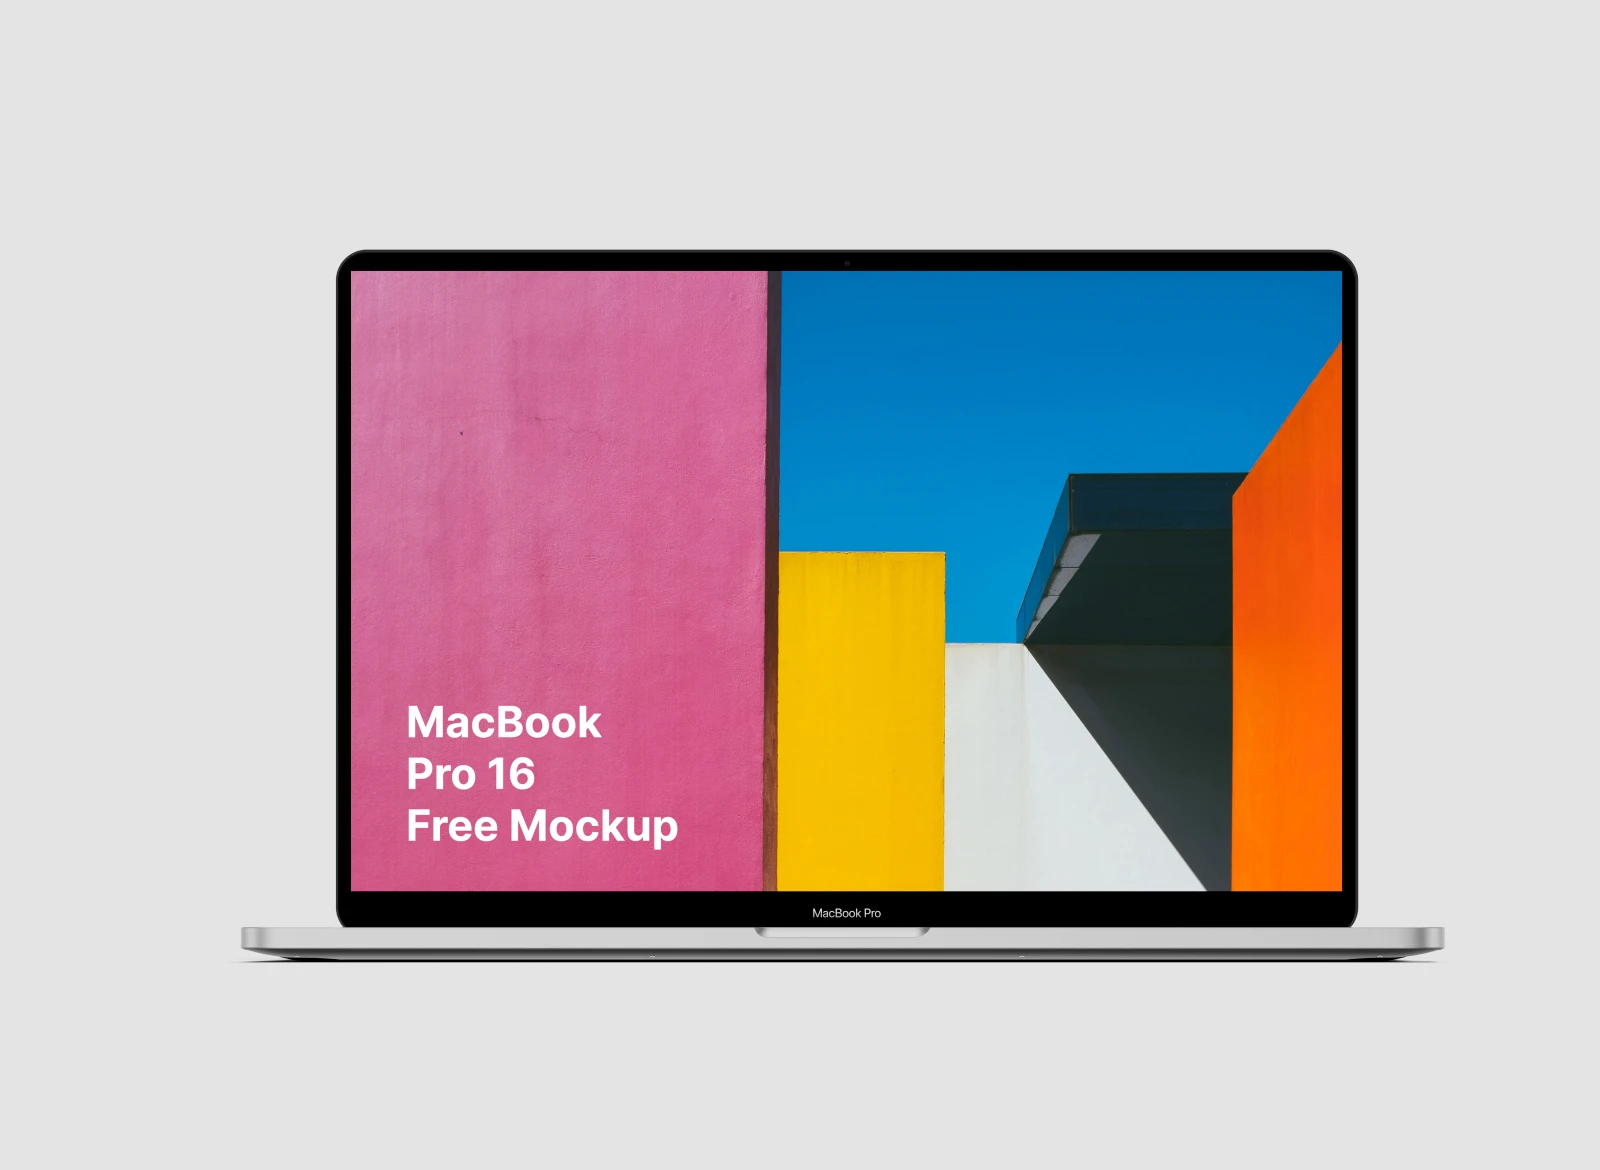 Free Macbook Pro 16 Mockup - Newest MacBook Pro 16 mockup. Use it for your web design or app design projects